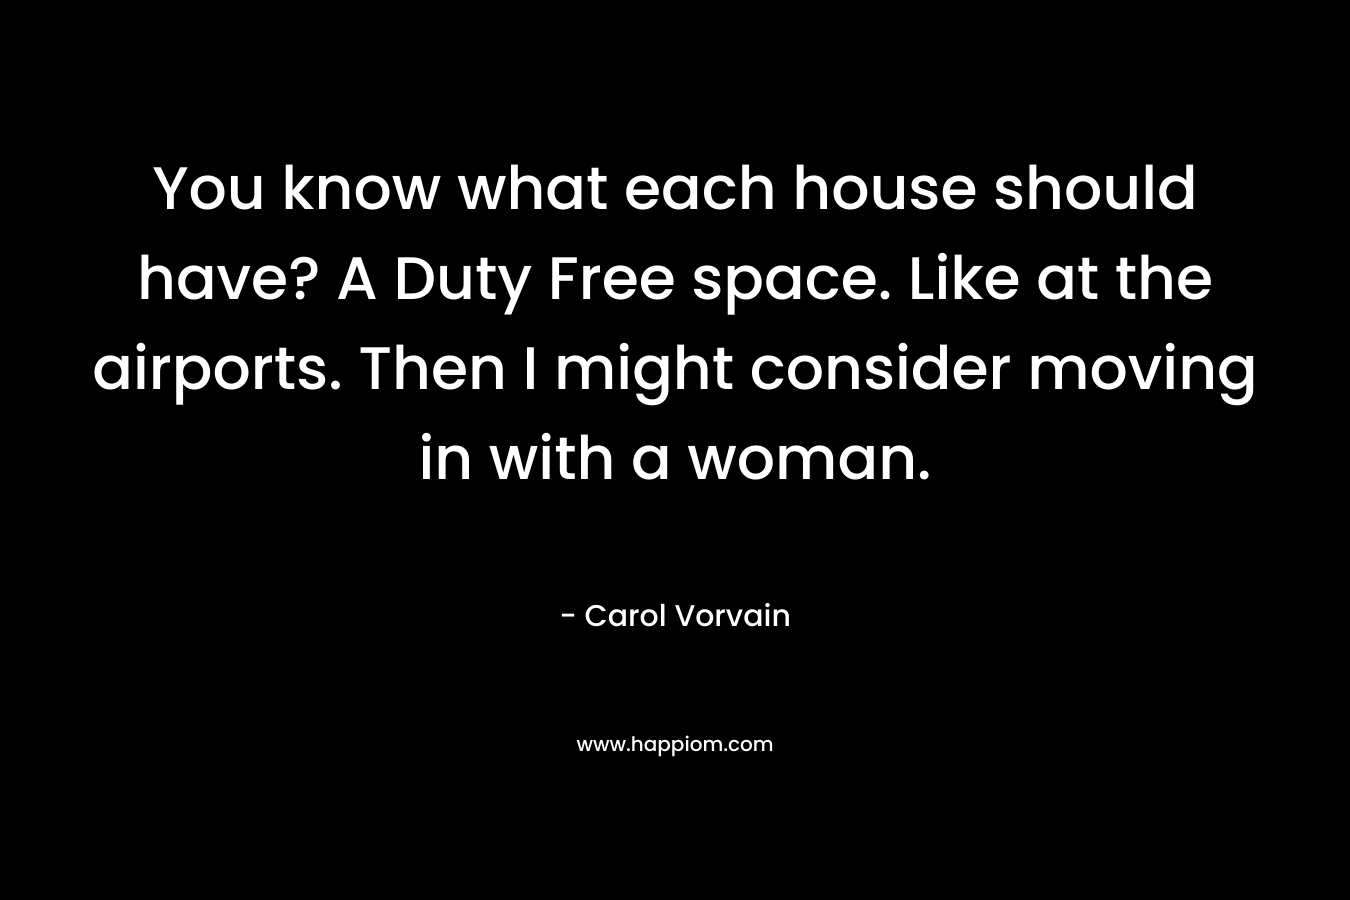 You know what each house should have? A Duty Free space. Like at the airports. Then I might consider moving in with a woman. – Carol Vorvain